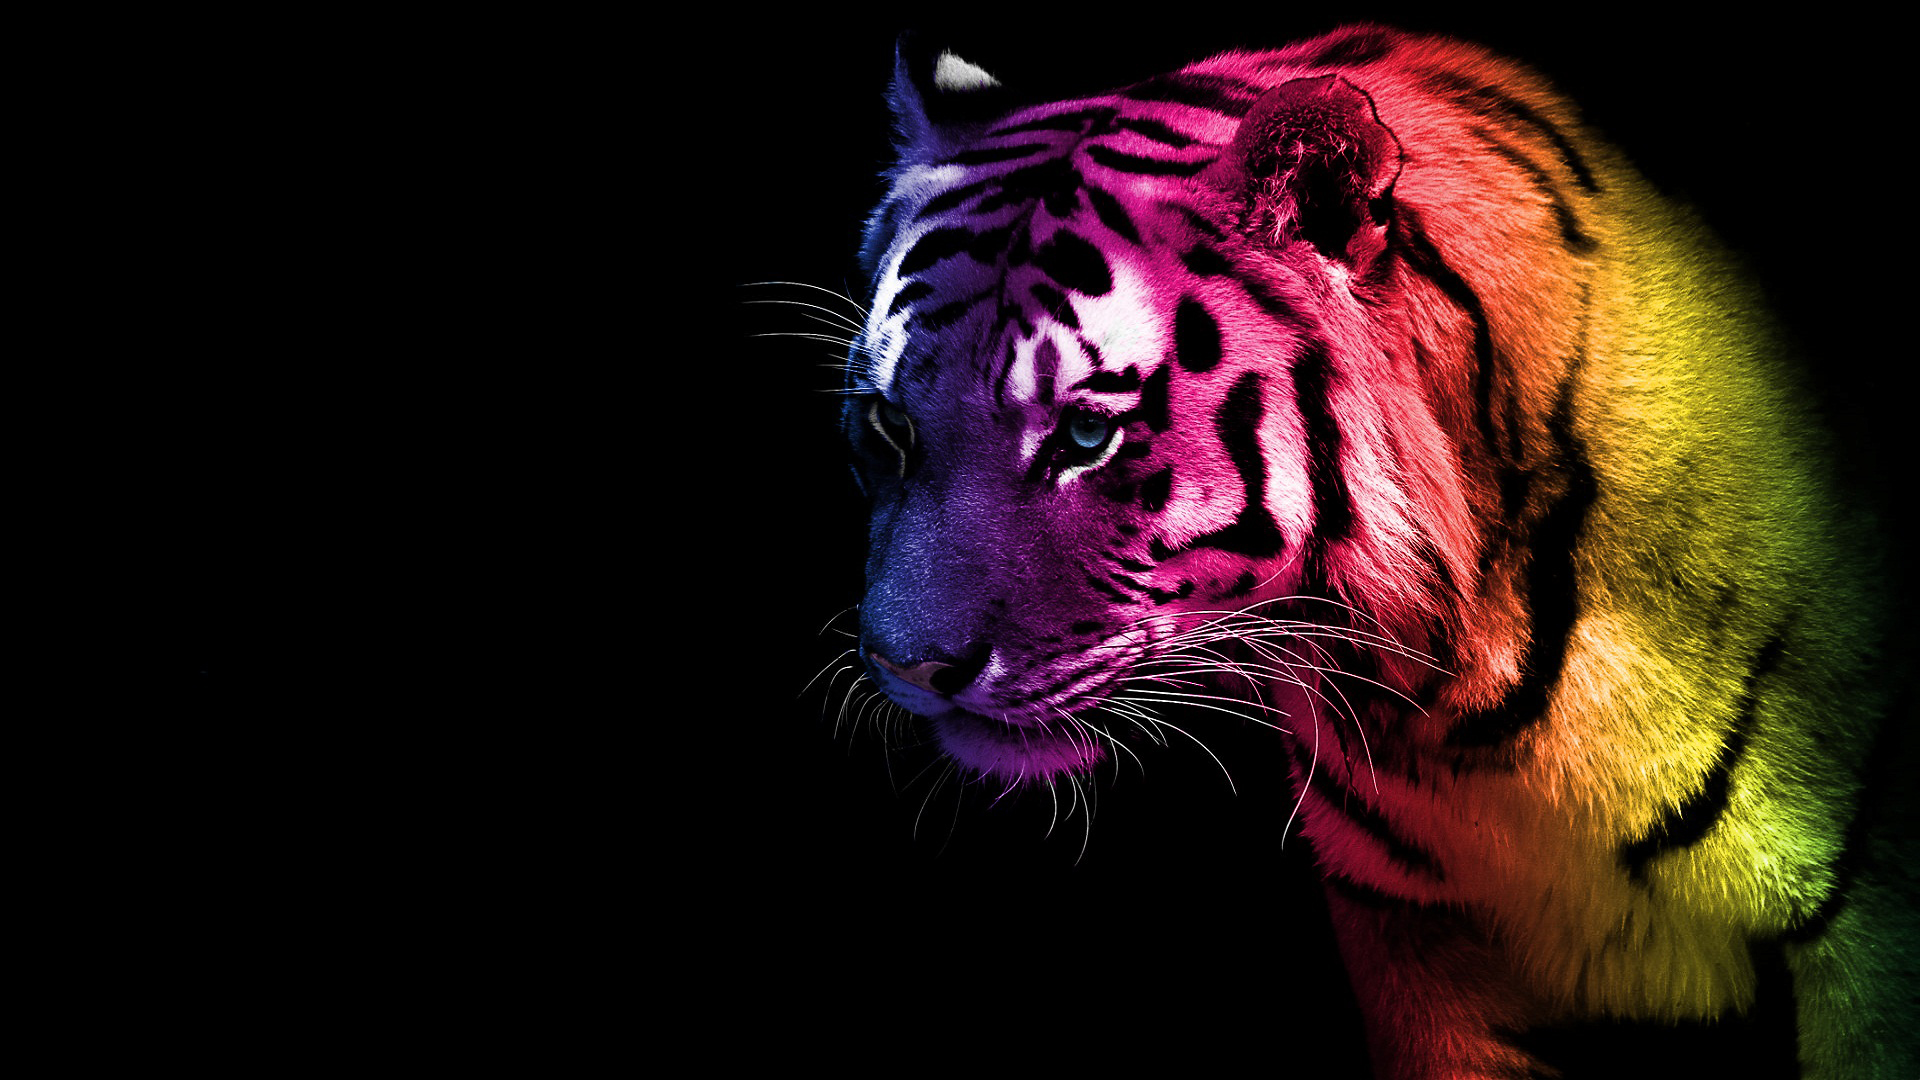 tiger colorful desktop background hd wallpapers - Free hd wallpapers